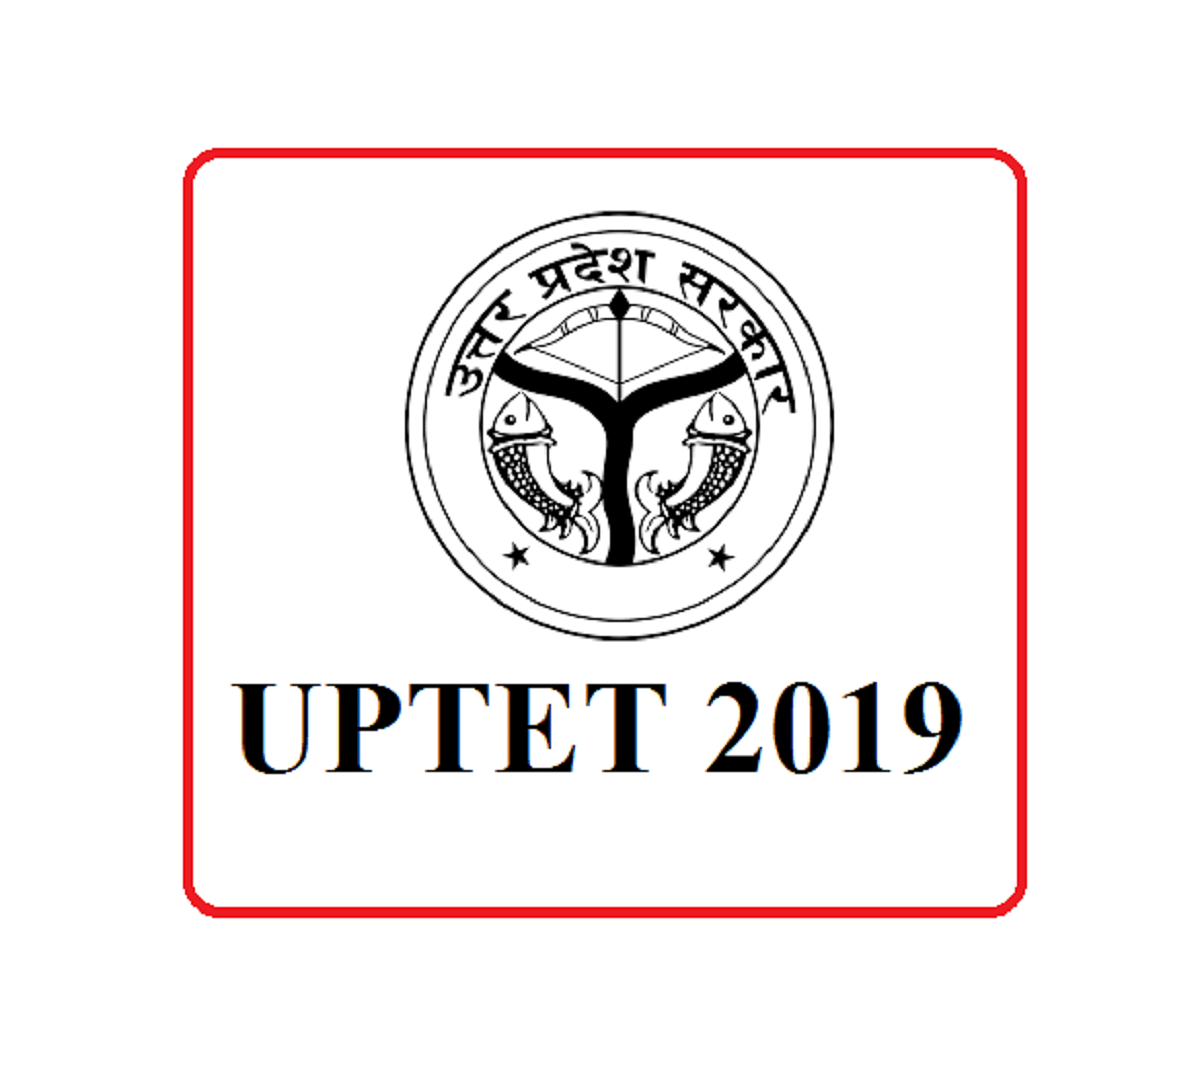 UPTET 2019: Latest Update About the Notification Here